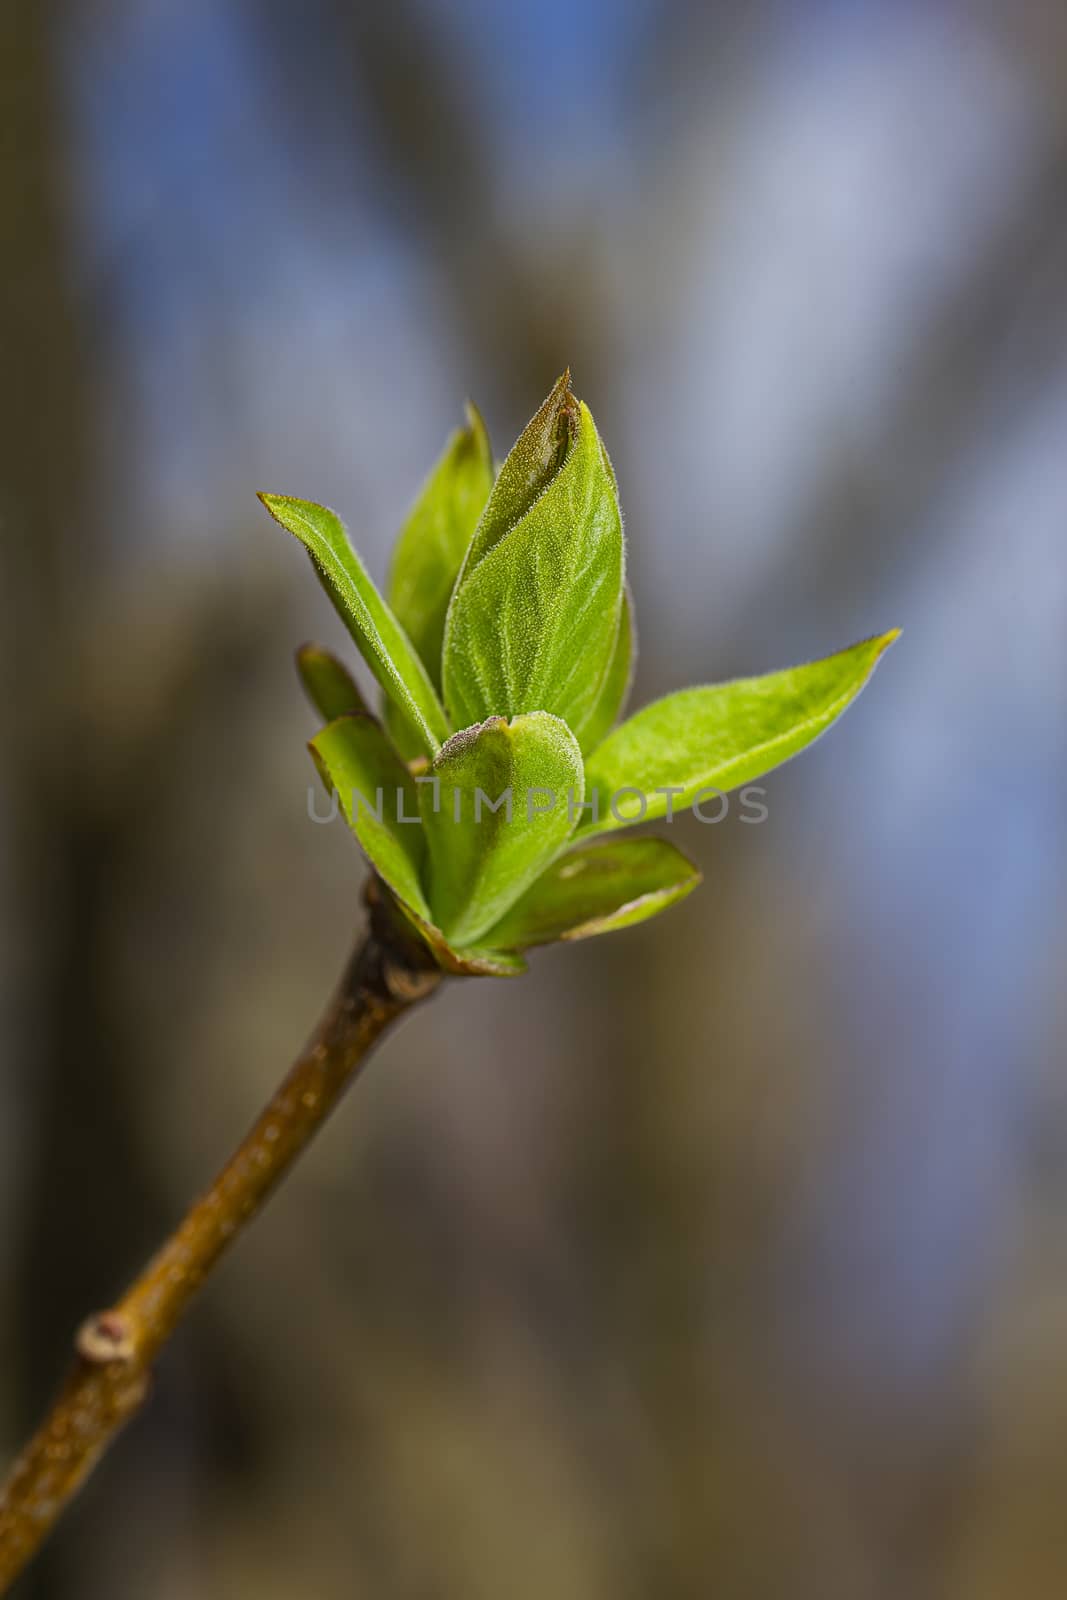 small leaf growing at the end of a branch